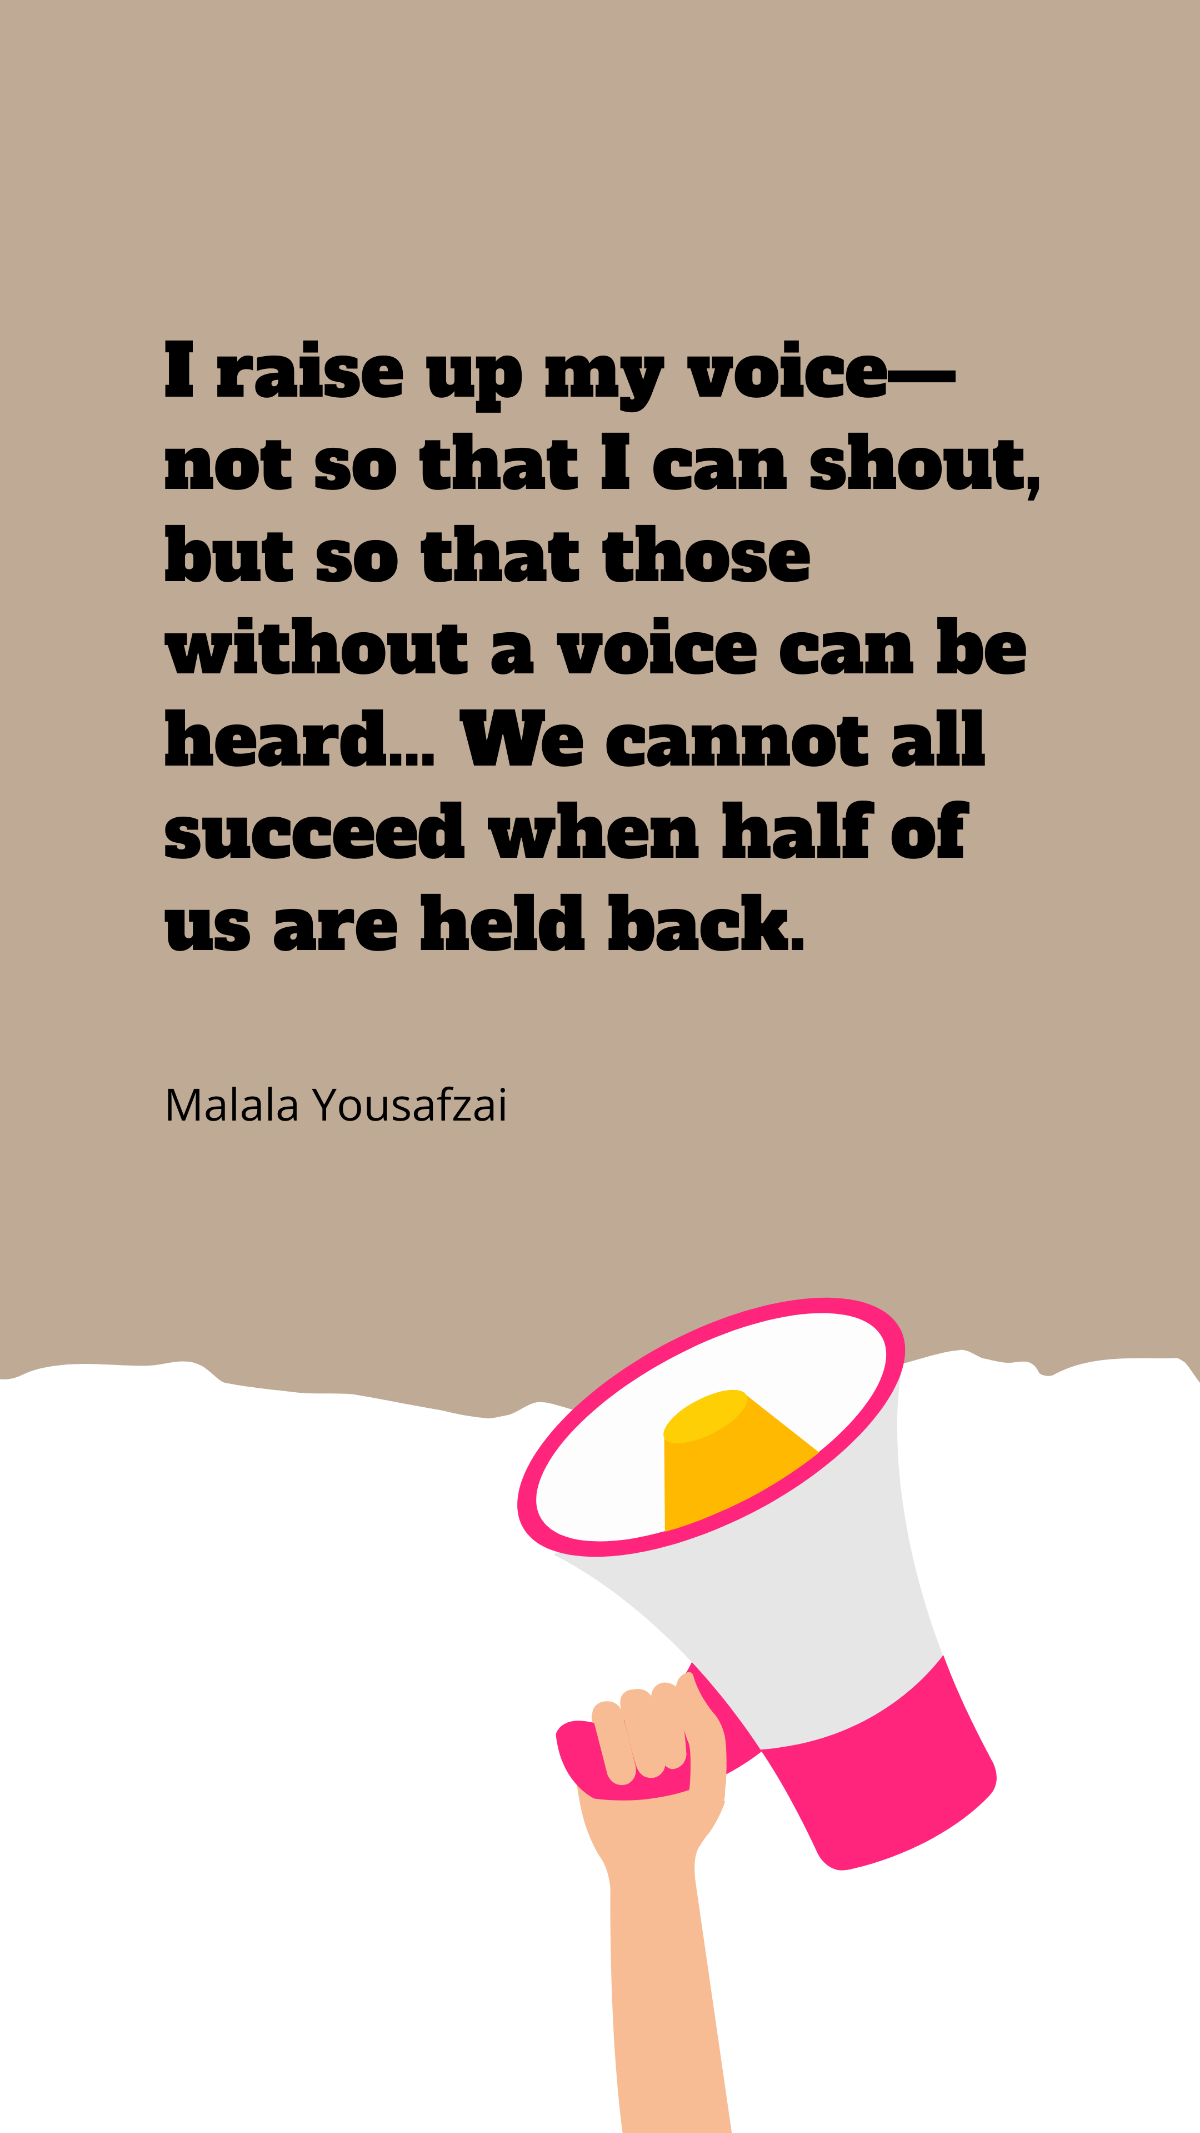 Malala Yousafzai - I raise up my voice—not so that I can shout, but so that those without a voice can be heard. … We cannot all succeed when half of us are held back. Template